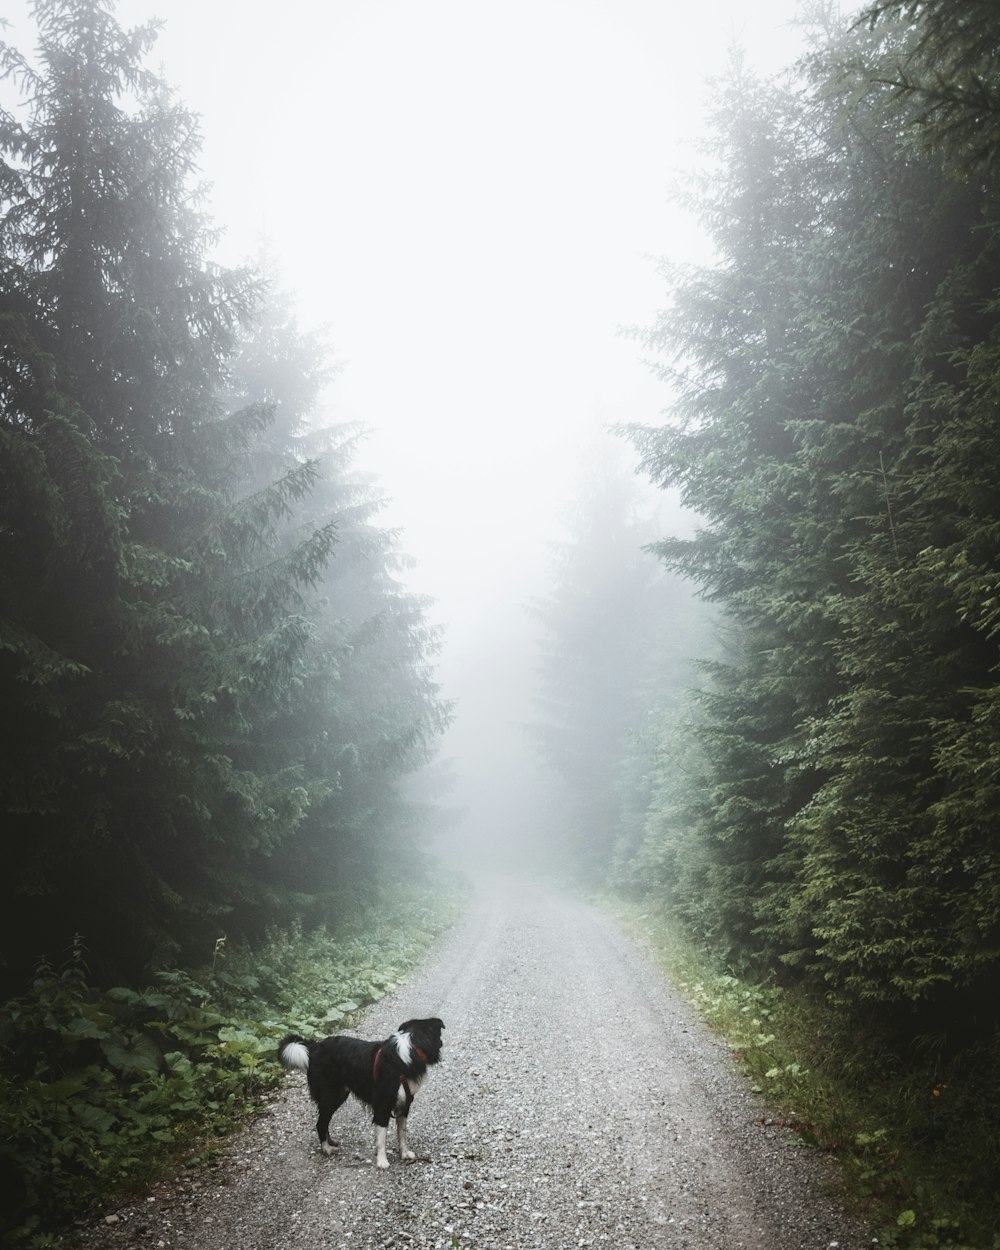 black and white dog standing on path surrounded by trees